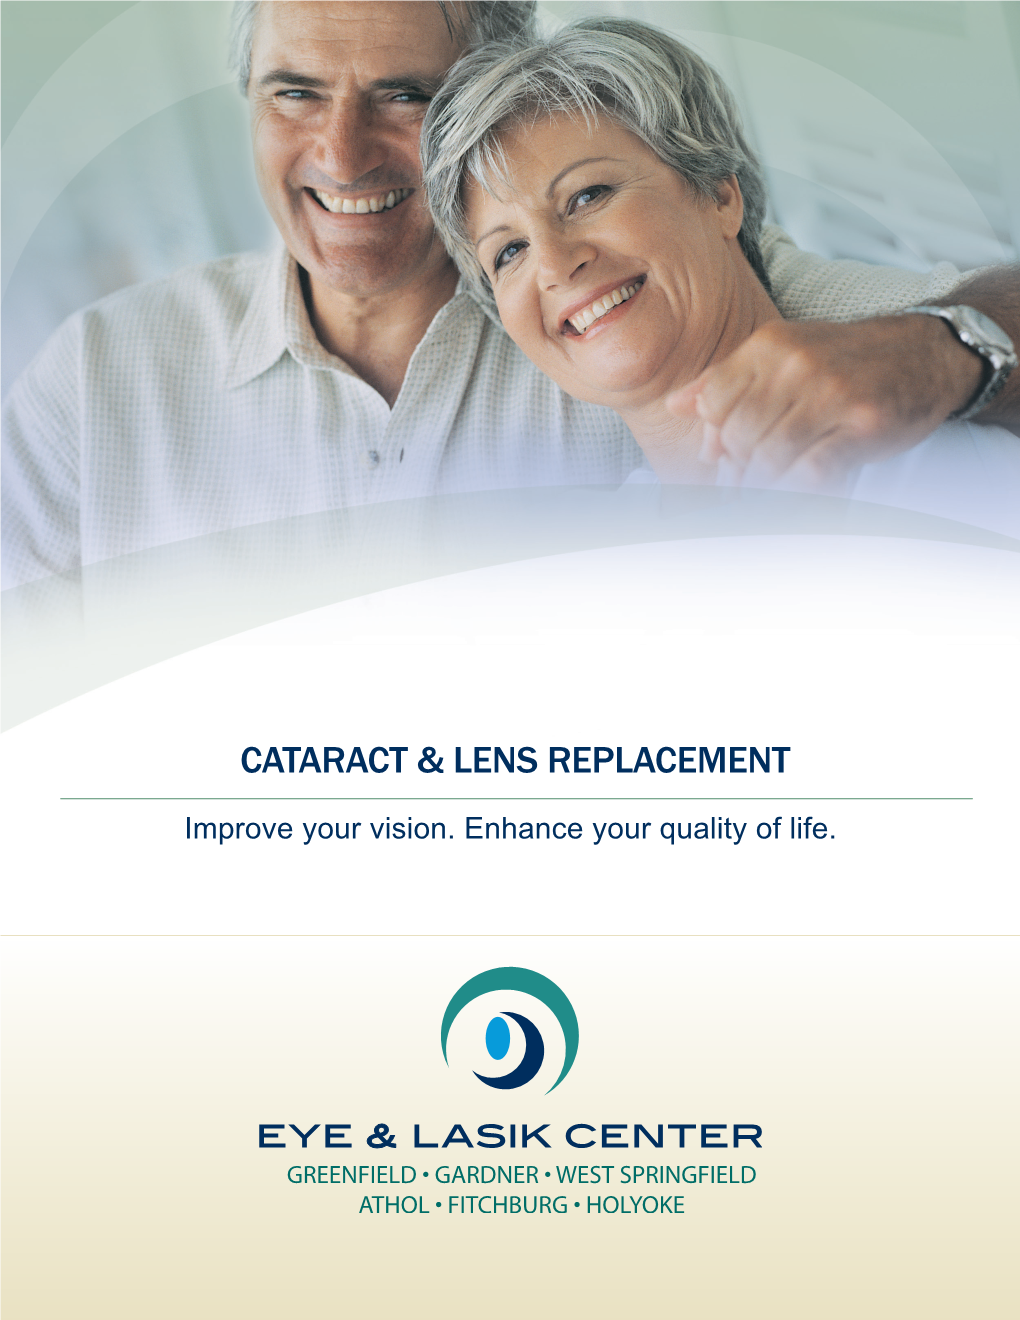 Cataract & Lens Replacement